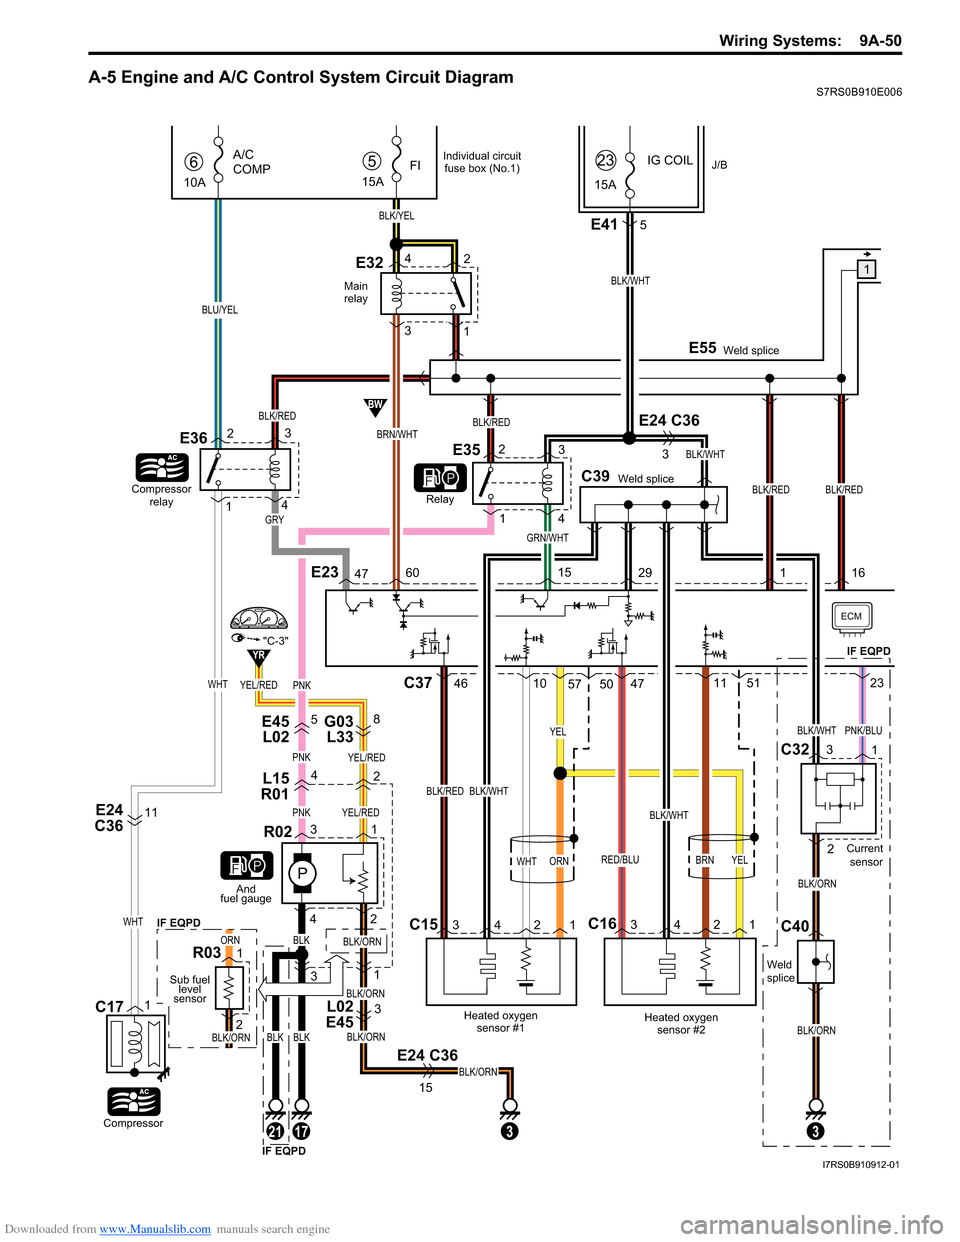 SUZUKI SWIFT 2006 2.G Service Workshop Manual Downloaded from www.Manualslib.com manuals search engine Wiring Systems:  9A-50
A-5 Engine and A/C Control System Circuit DiagramS7RS0B910E006
YEL/RED
E45L02 G03 
L33
L02 
E4558
L15
R0142
PNKYEL/RED
P